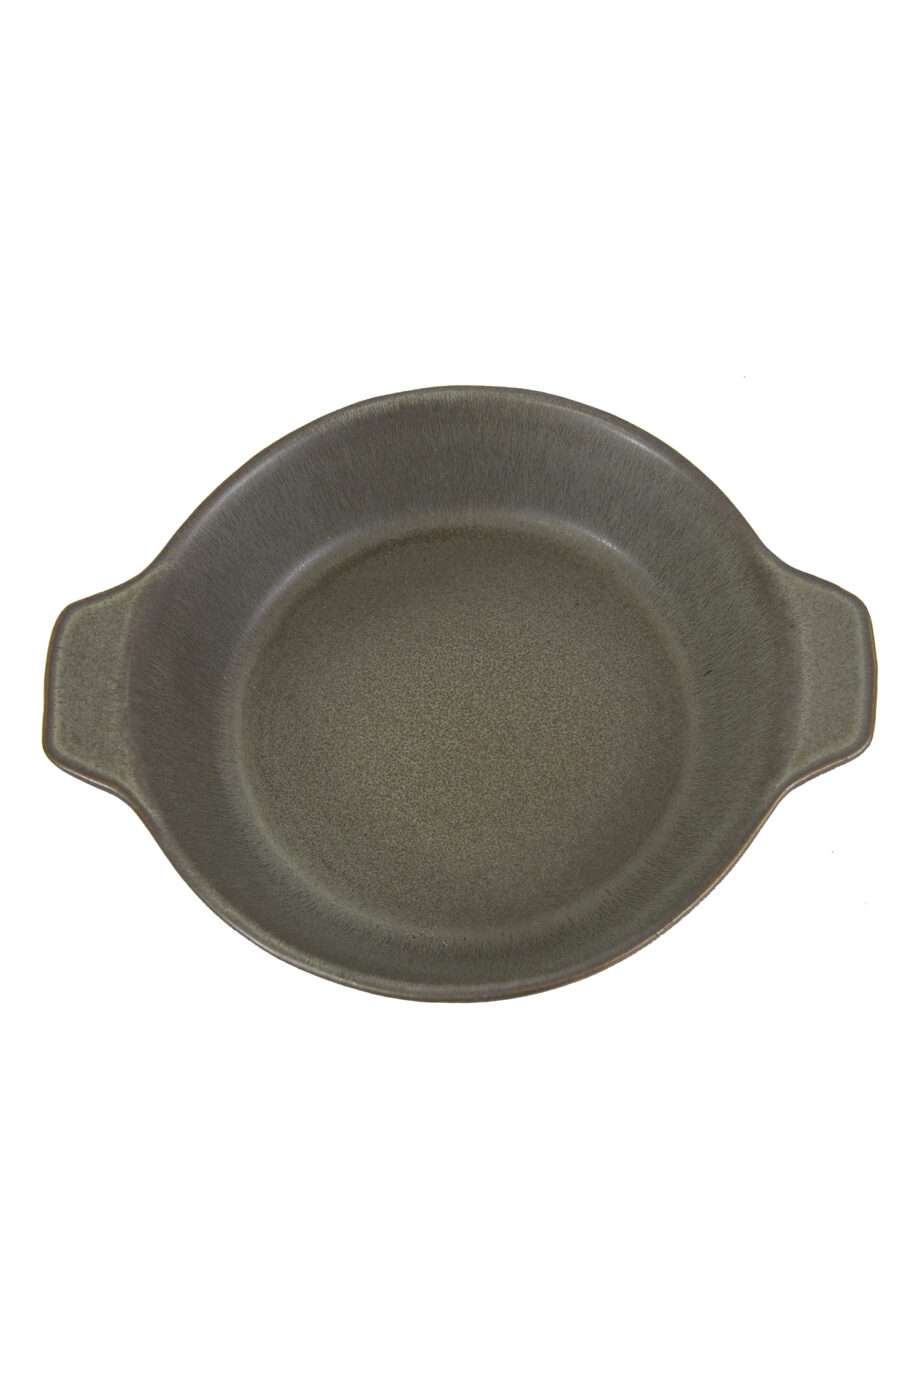 oven plate charcoal mat ceramic small